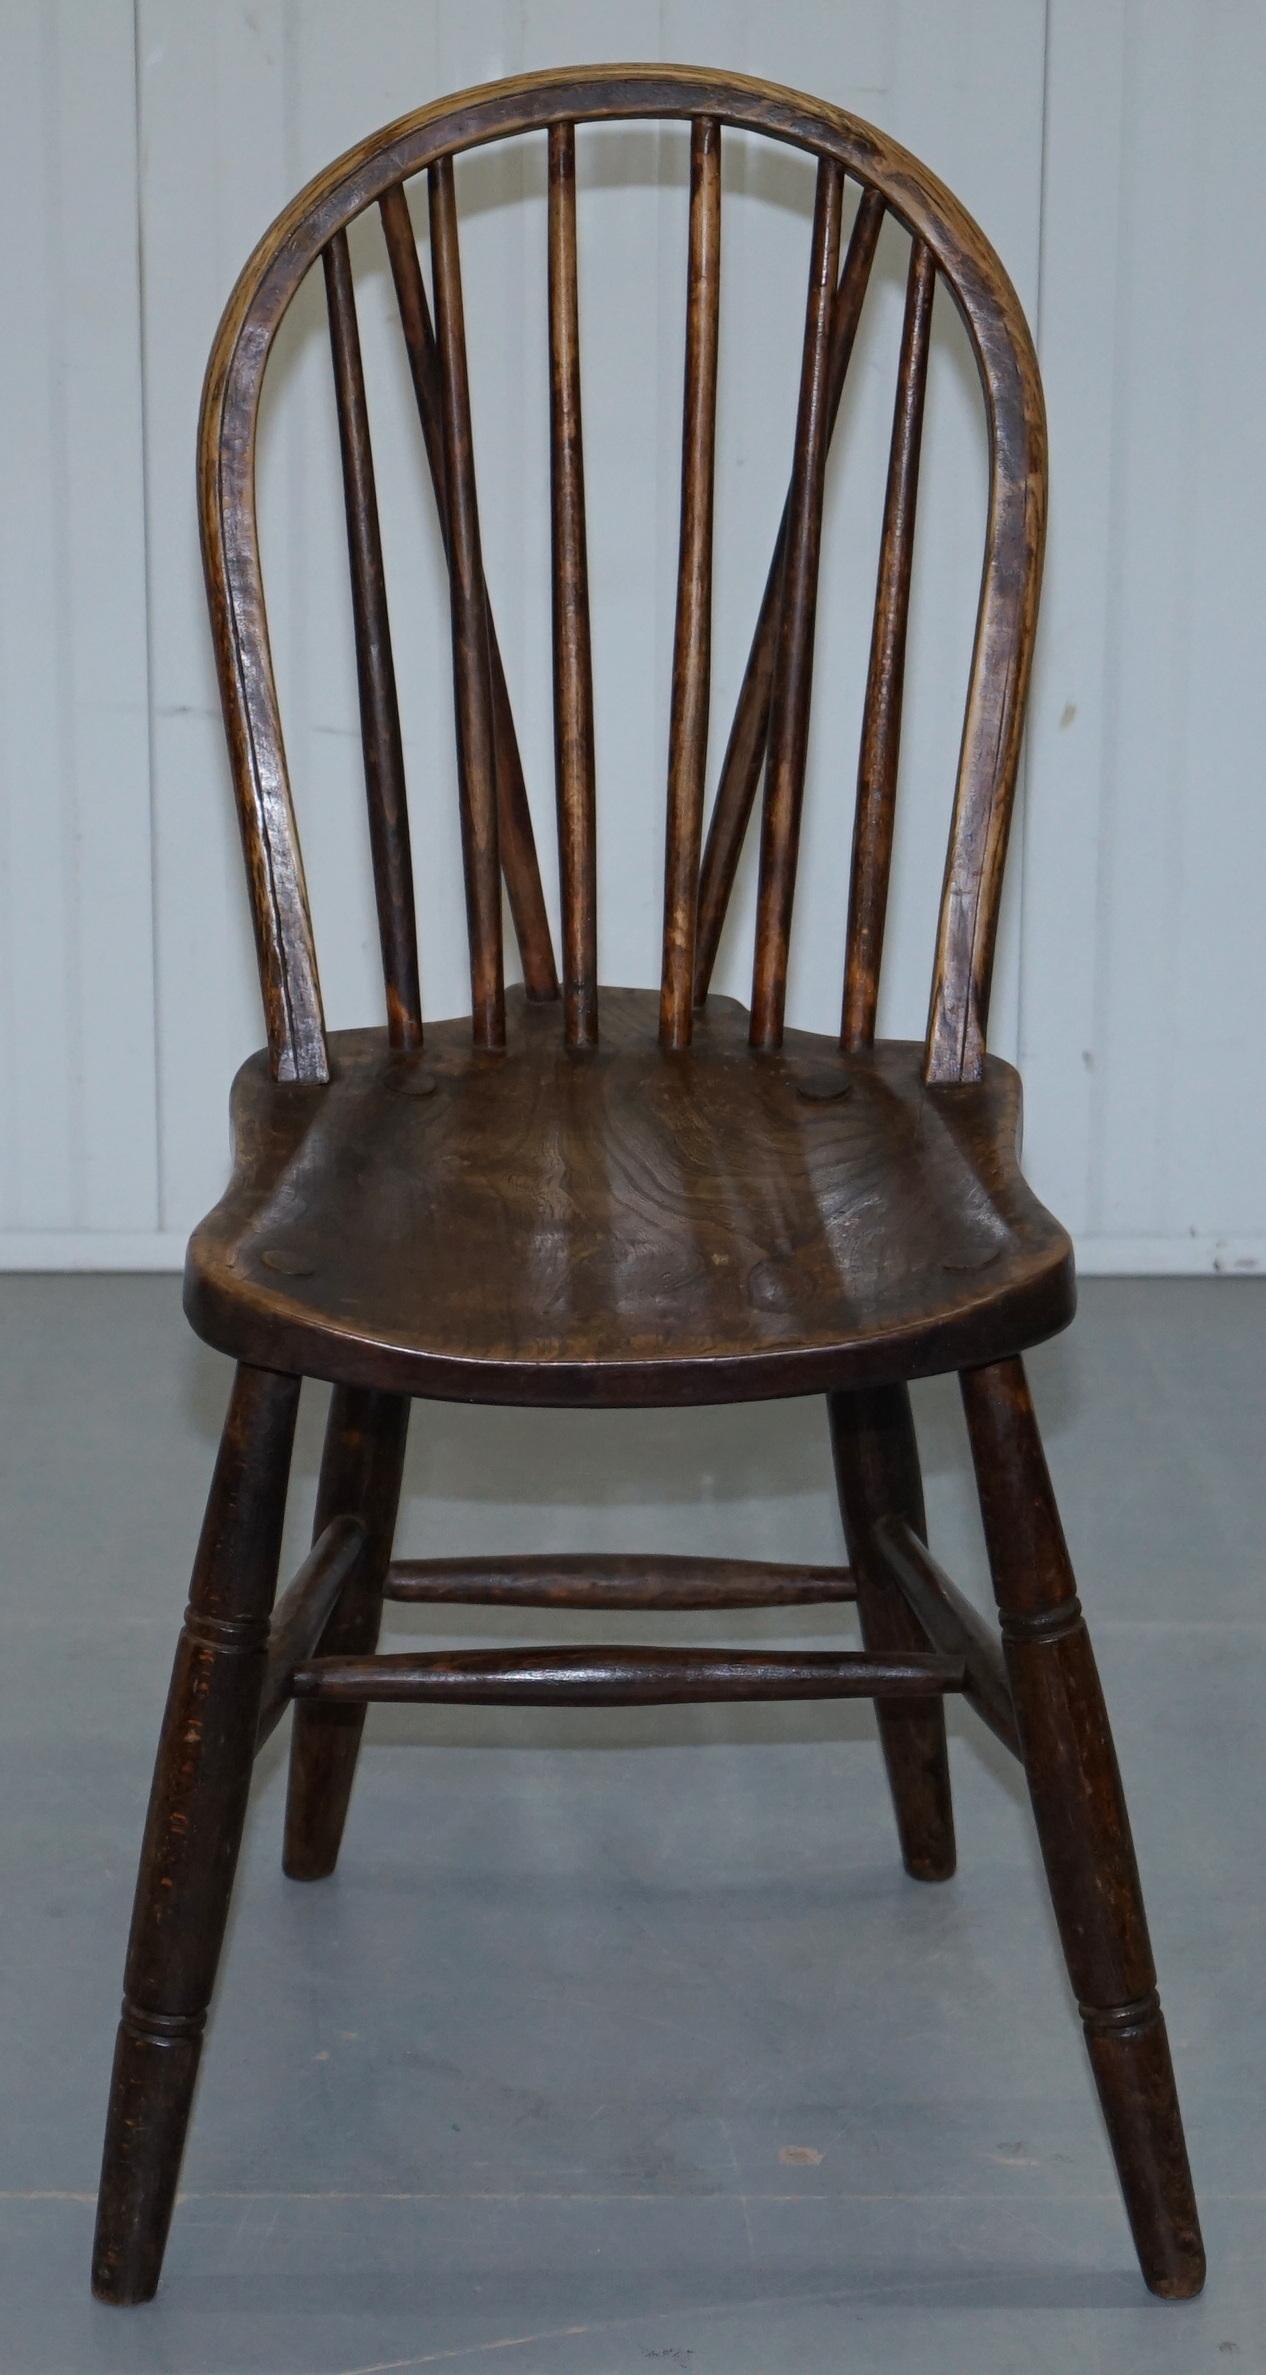 Rare Pair of Fully Stamped Victorian 1840 Hoop Back Windsor Chairs High Wycombe 5